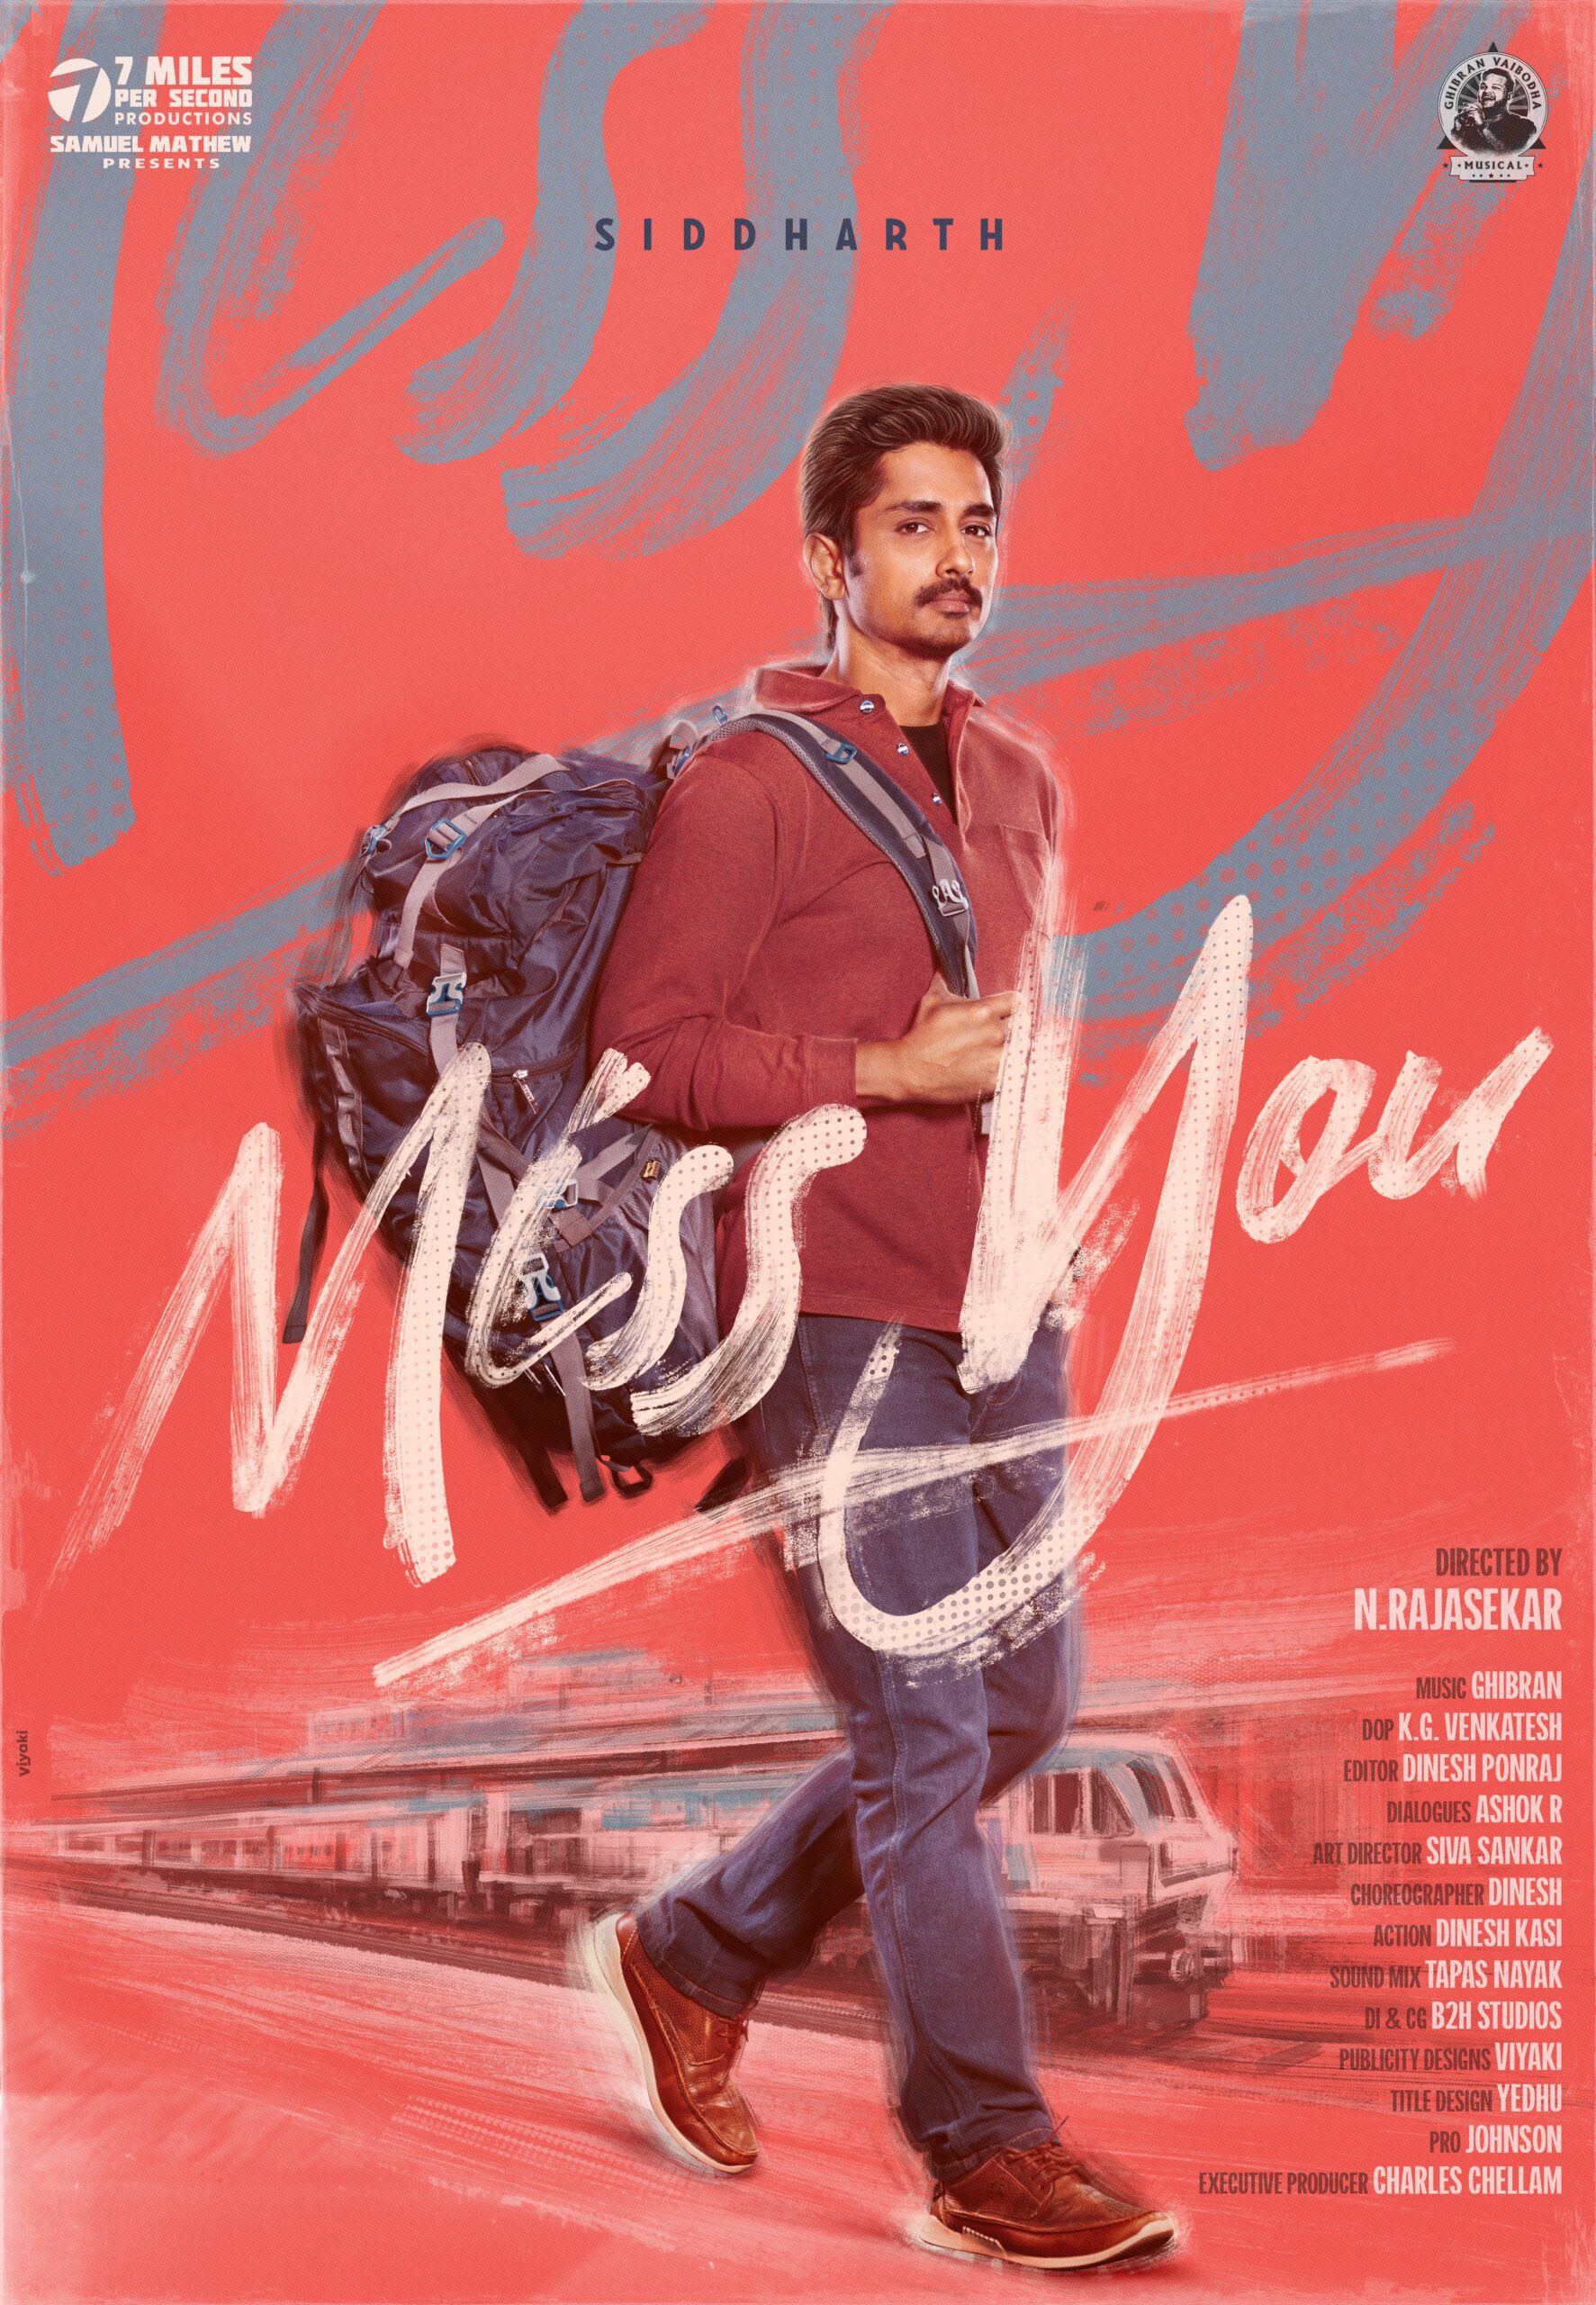 Take a glimpse at the initial appearance of Siddharth's Miss You